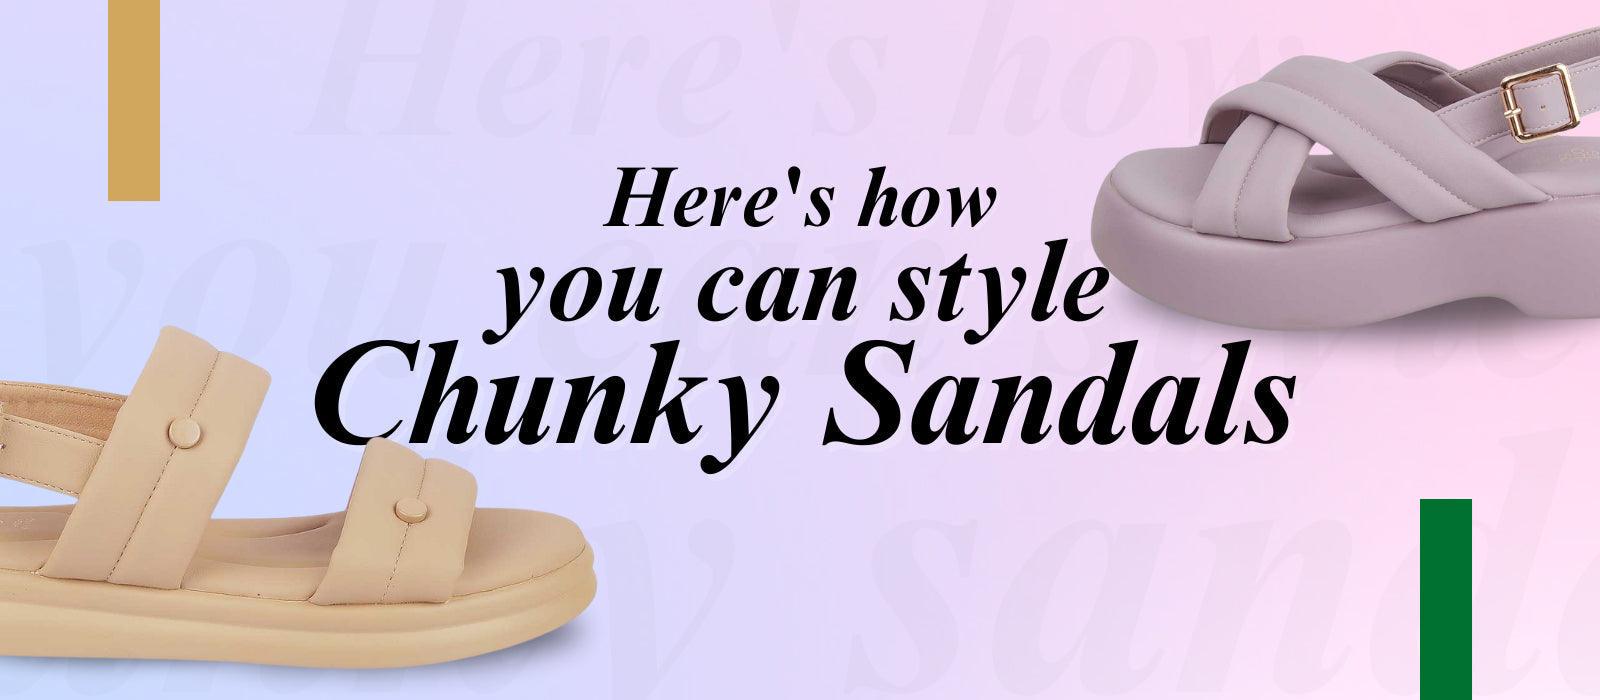 Here’s how you can style chunky sandals - Tresmode